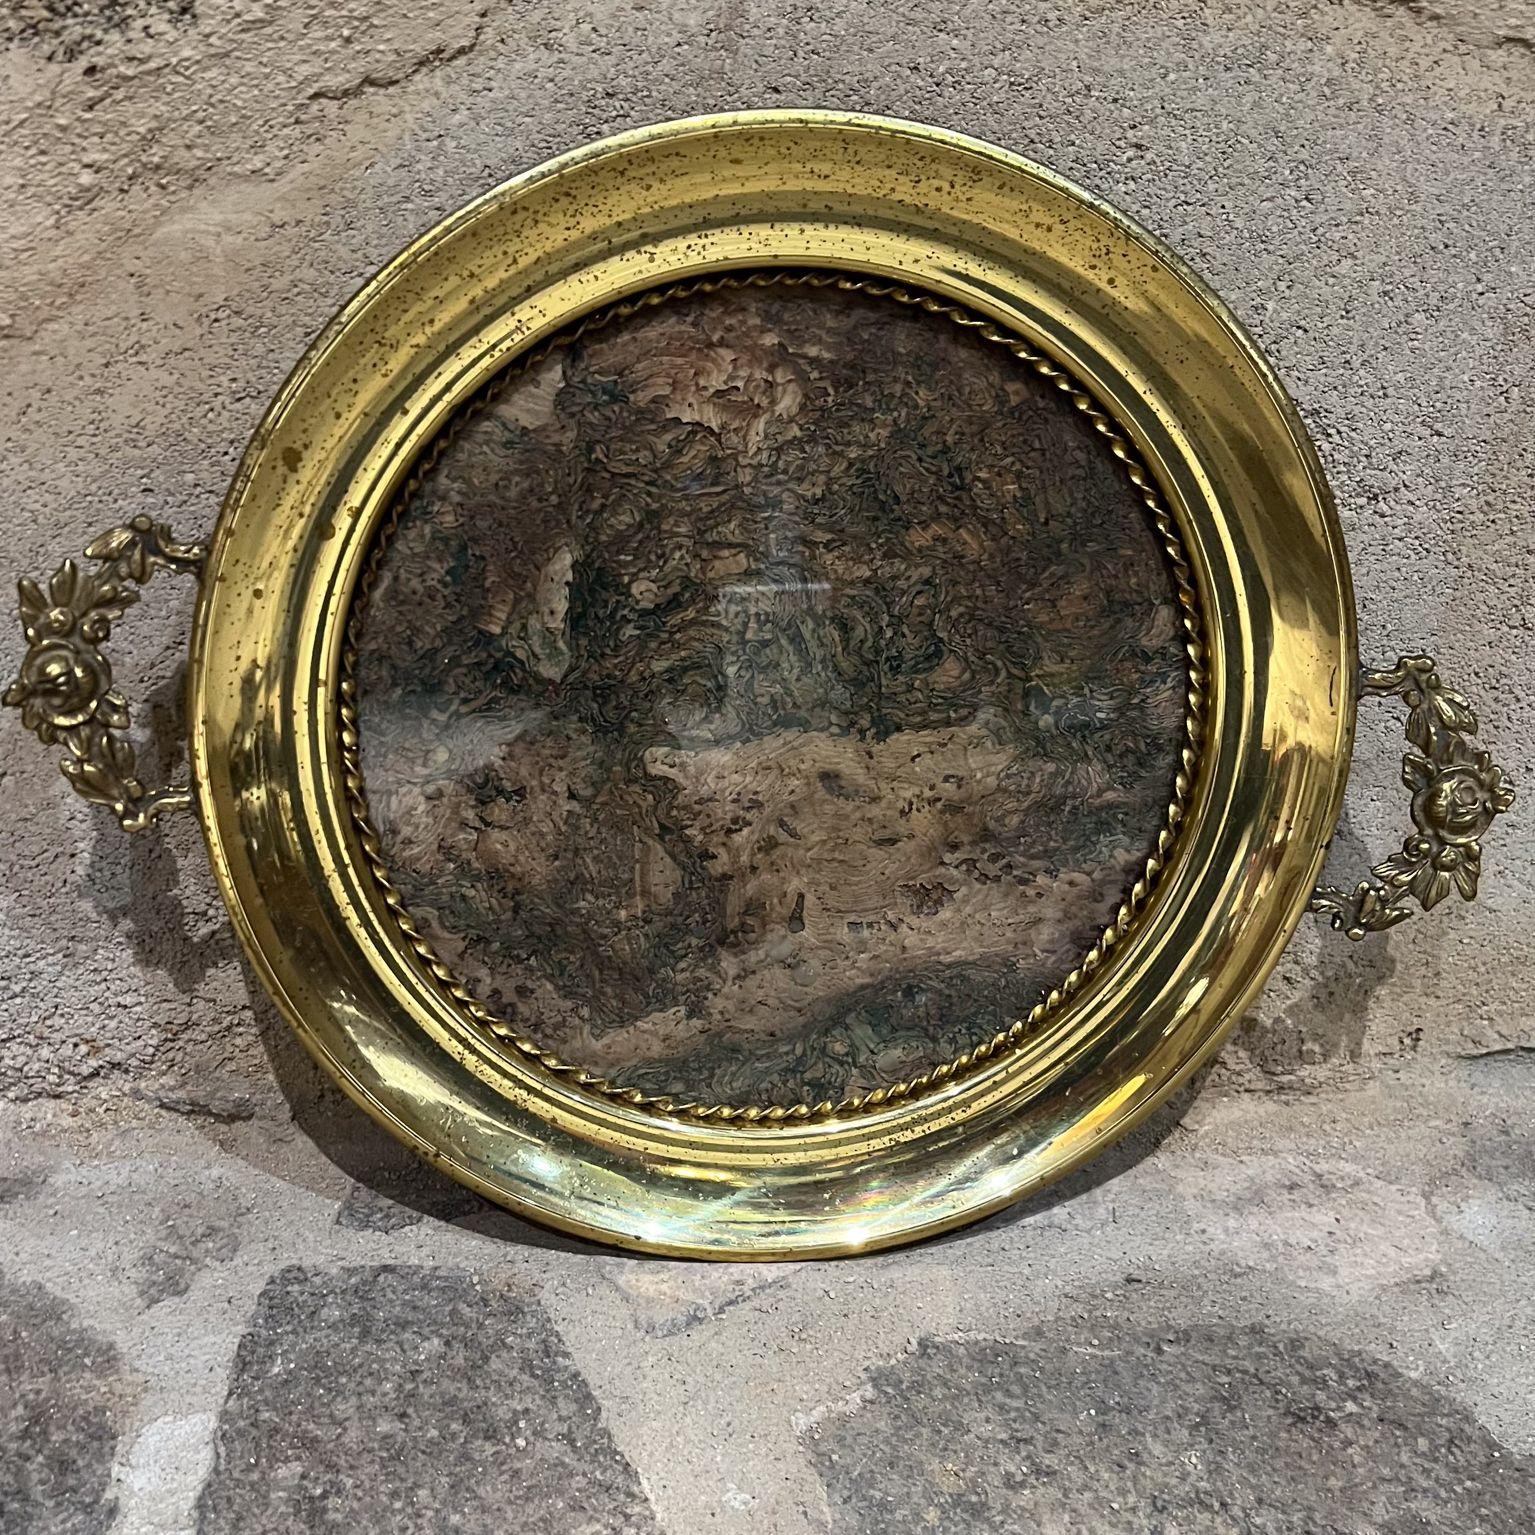 20th Century European Antique Service Tray Ornate Brass  For Sale